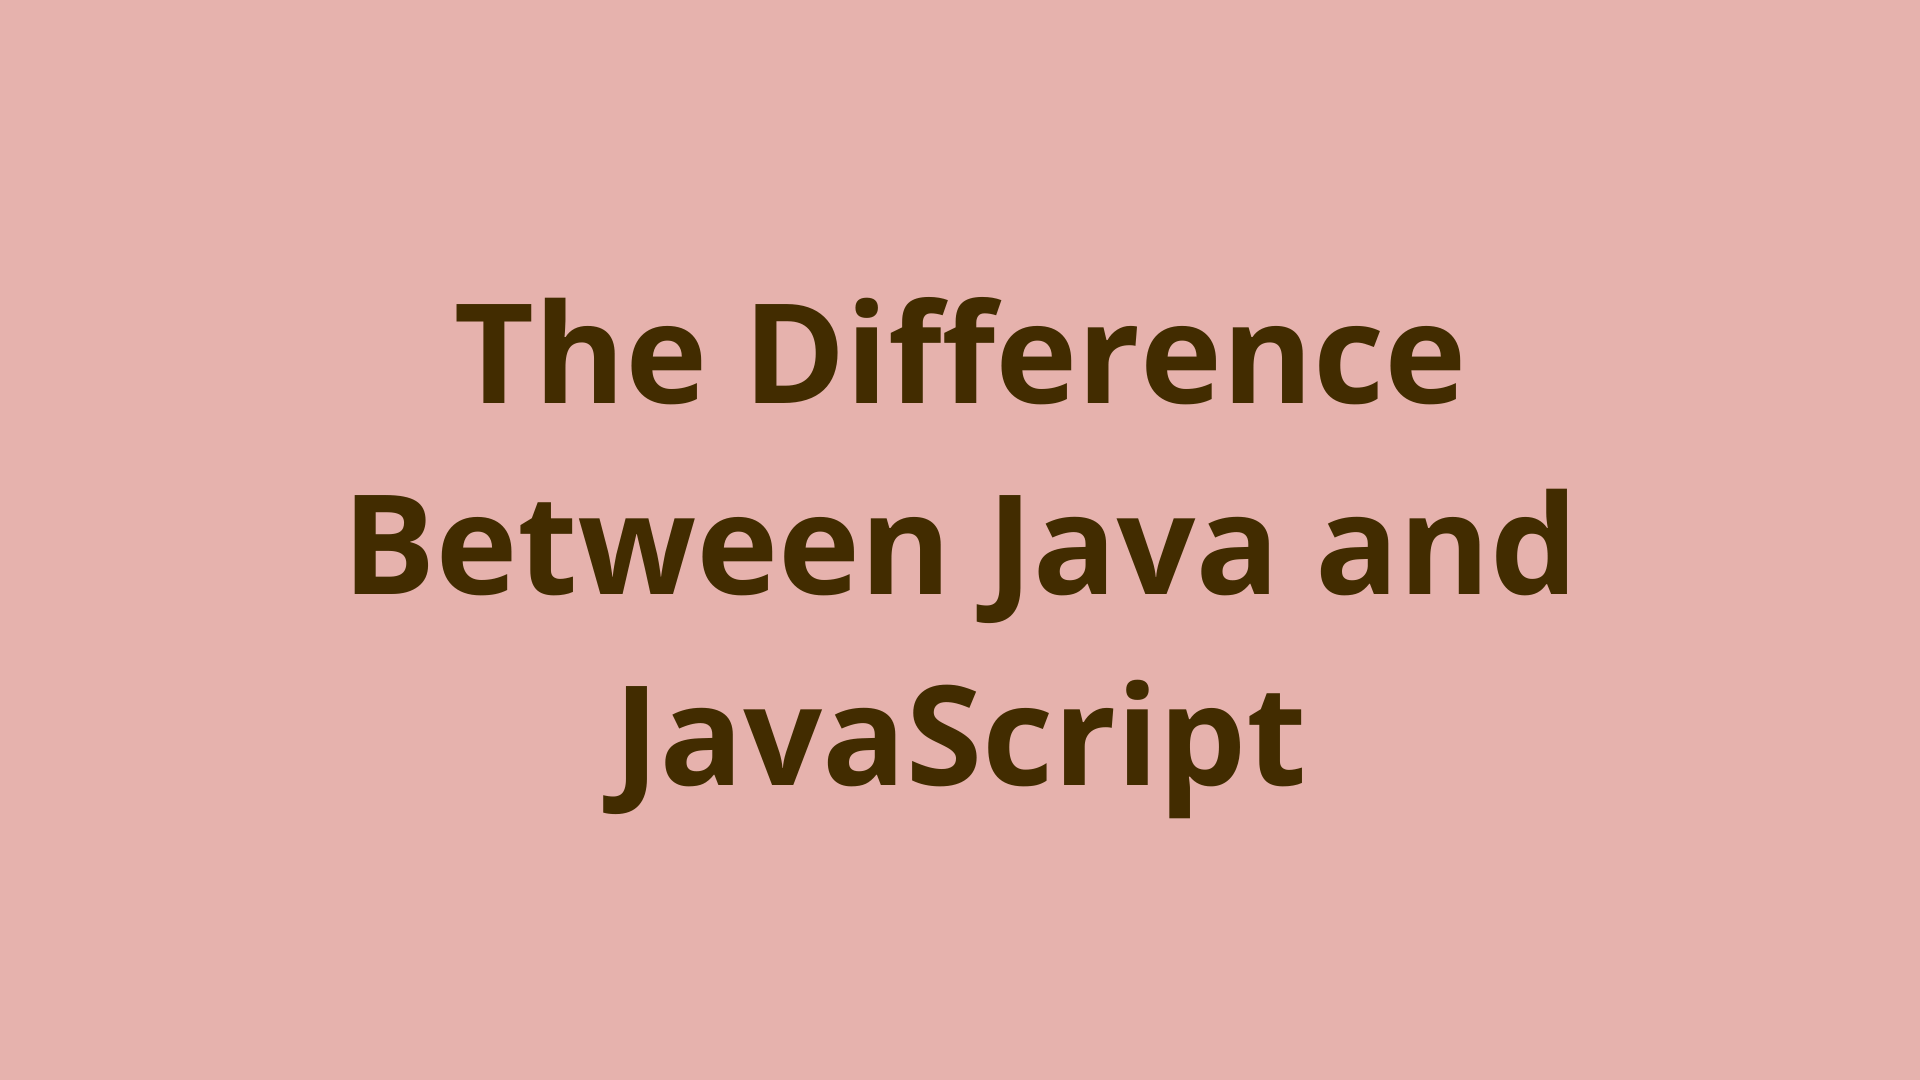 Image of The Difference Between Java and JavaScript